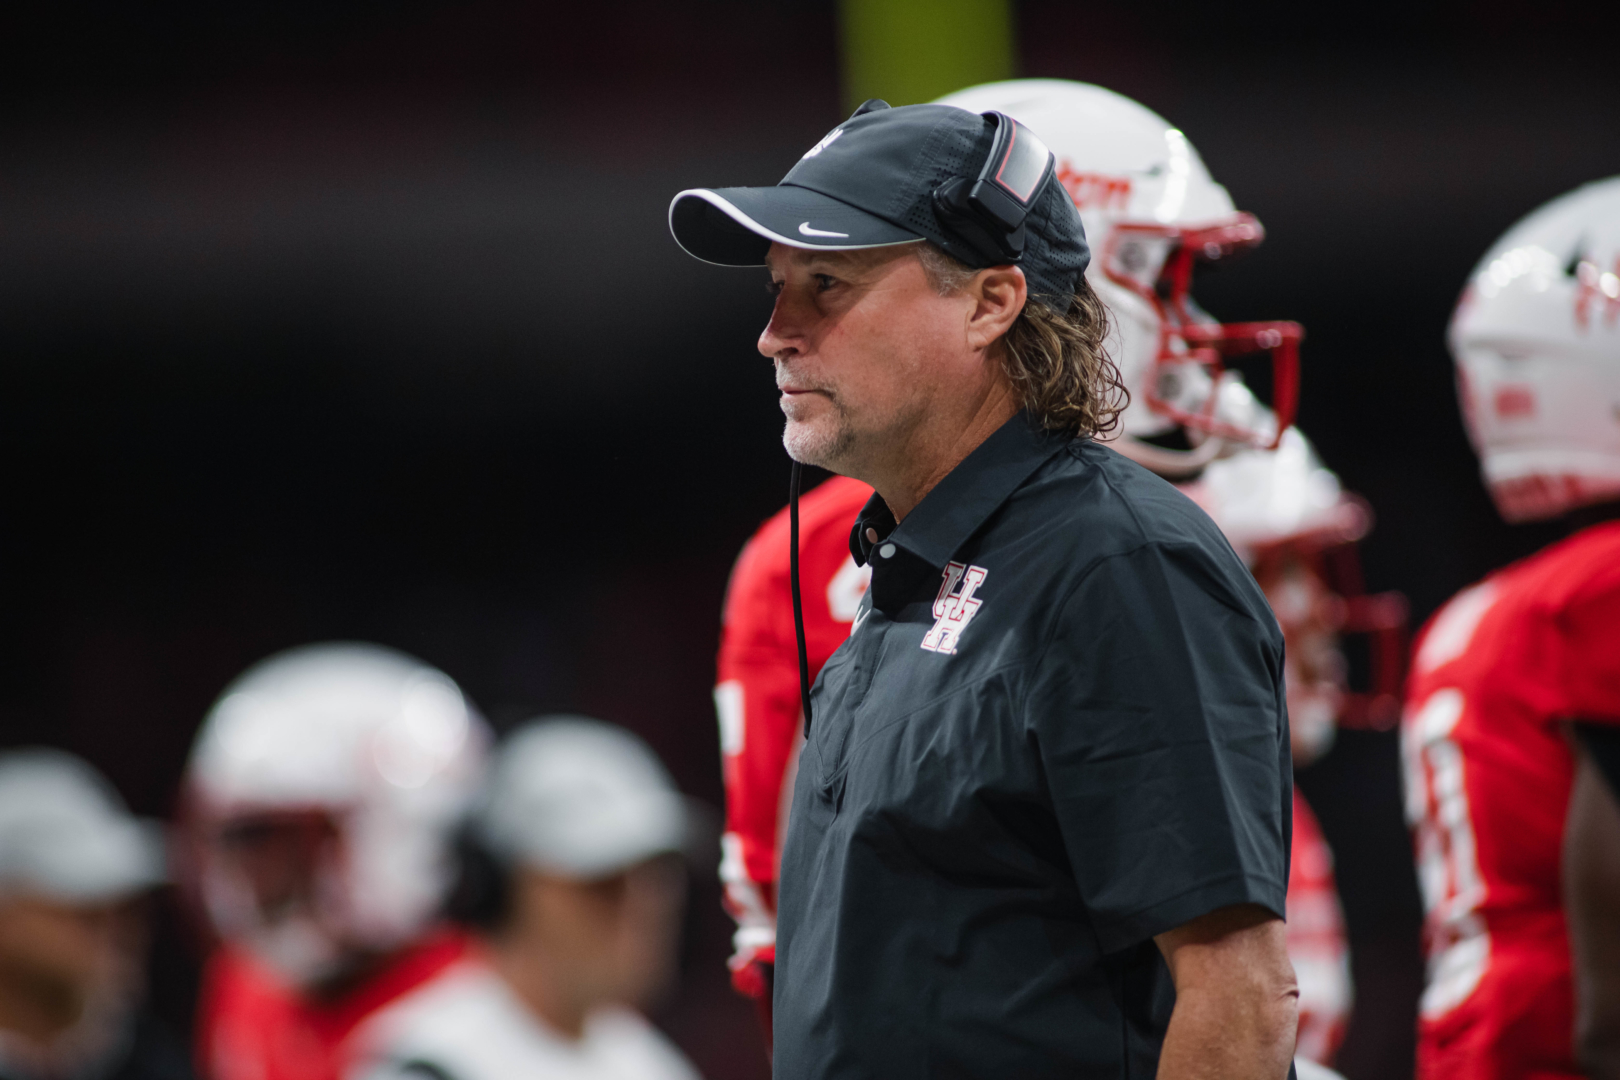 Dana Holgorsen made the unconventional decision to put his offense on the field to begin overtime in the UH football's season opener against UTSA. | James Schillinger/The Cougar